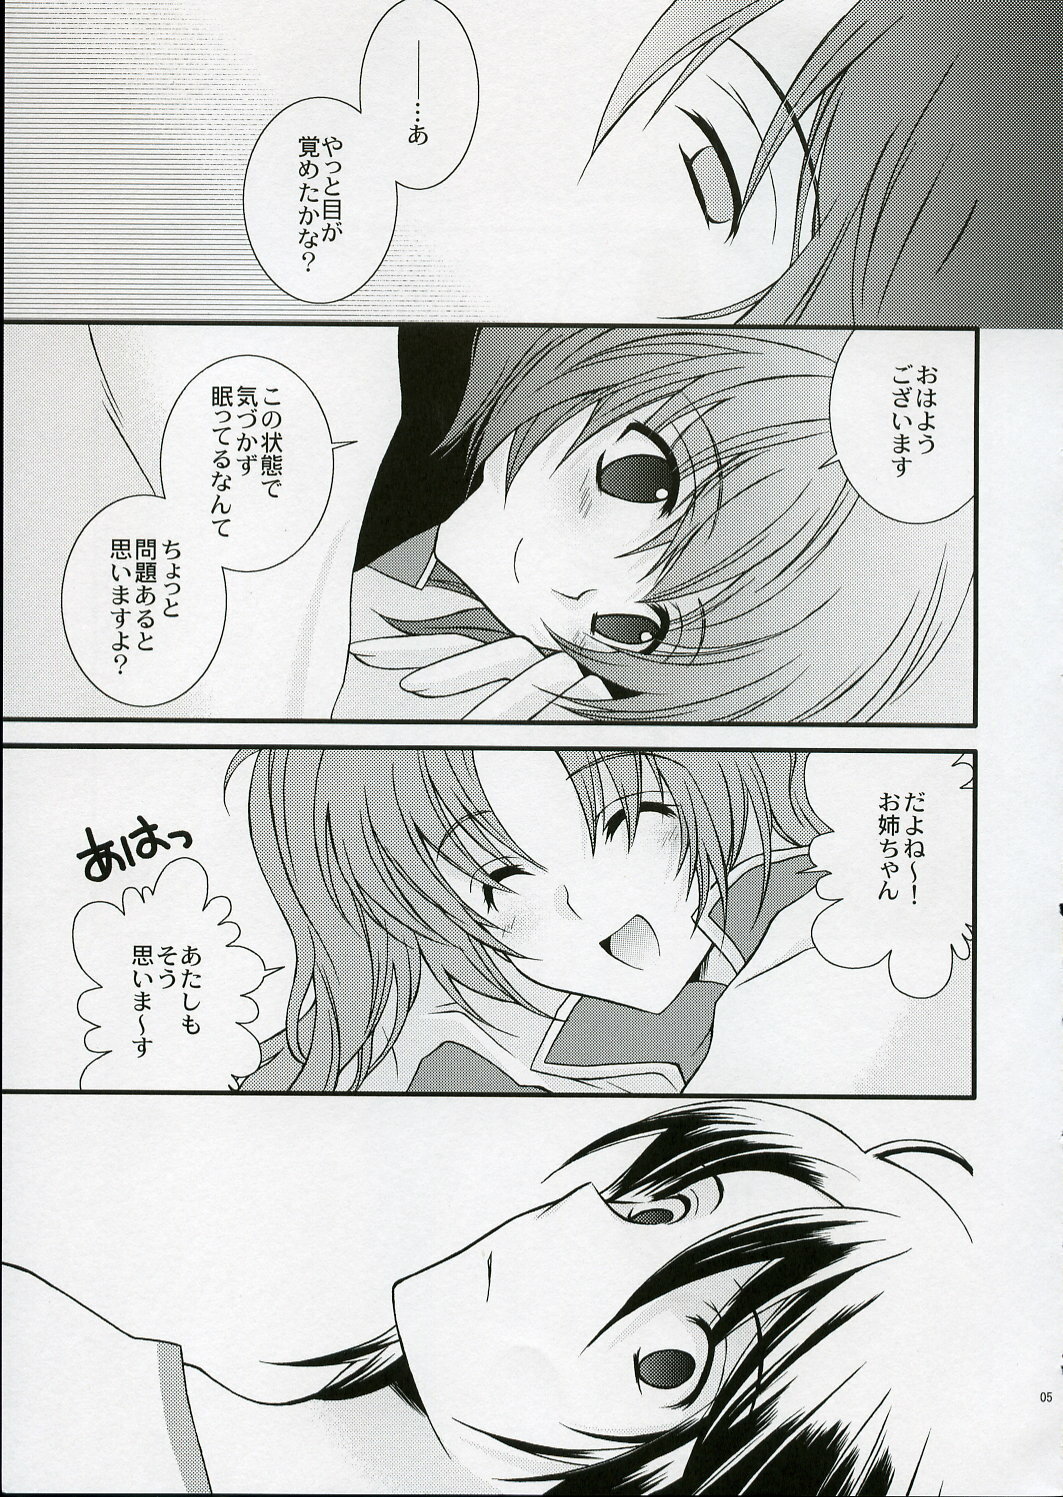 (SC28) [YLANG-YLANG (Ichie Ryouko)] RENDEZ-VOUS (Mobile Suit Gundam SEED DESTINY) page 4 full